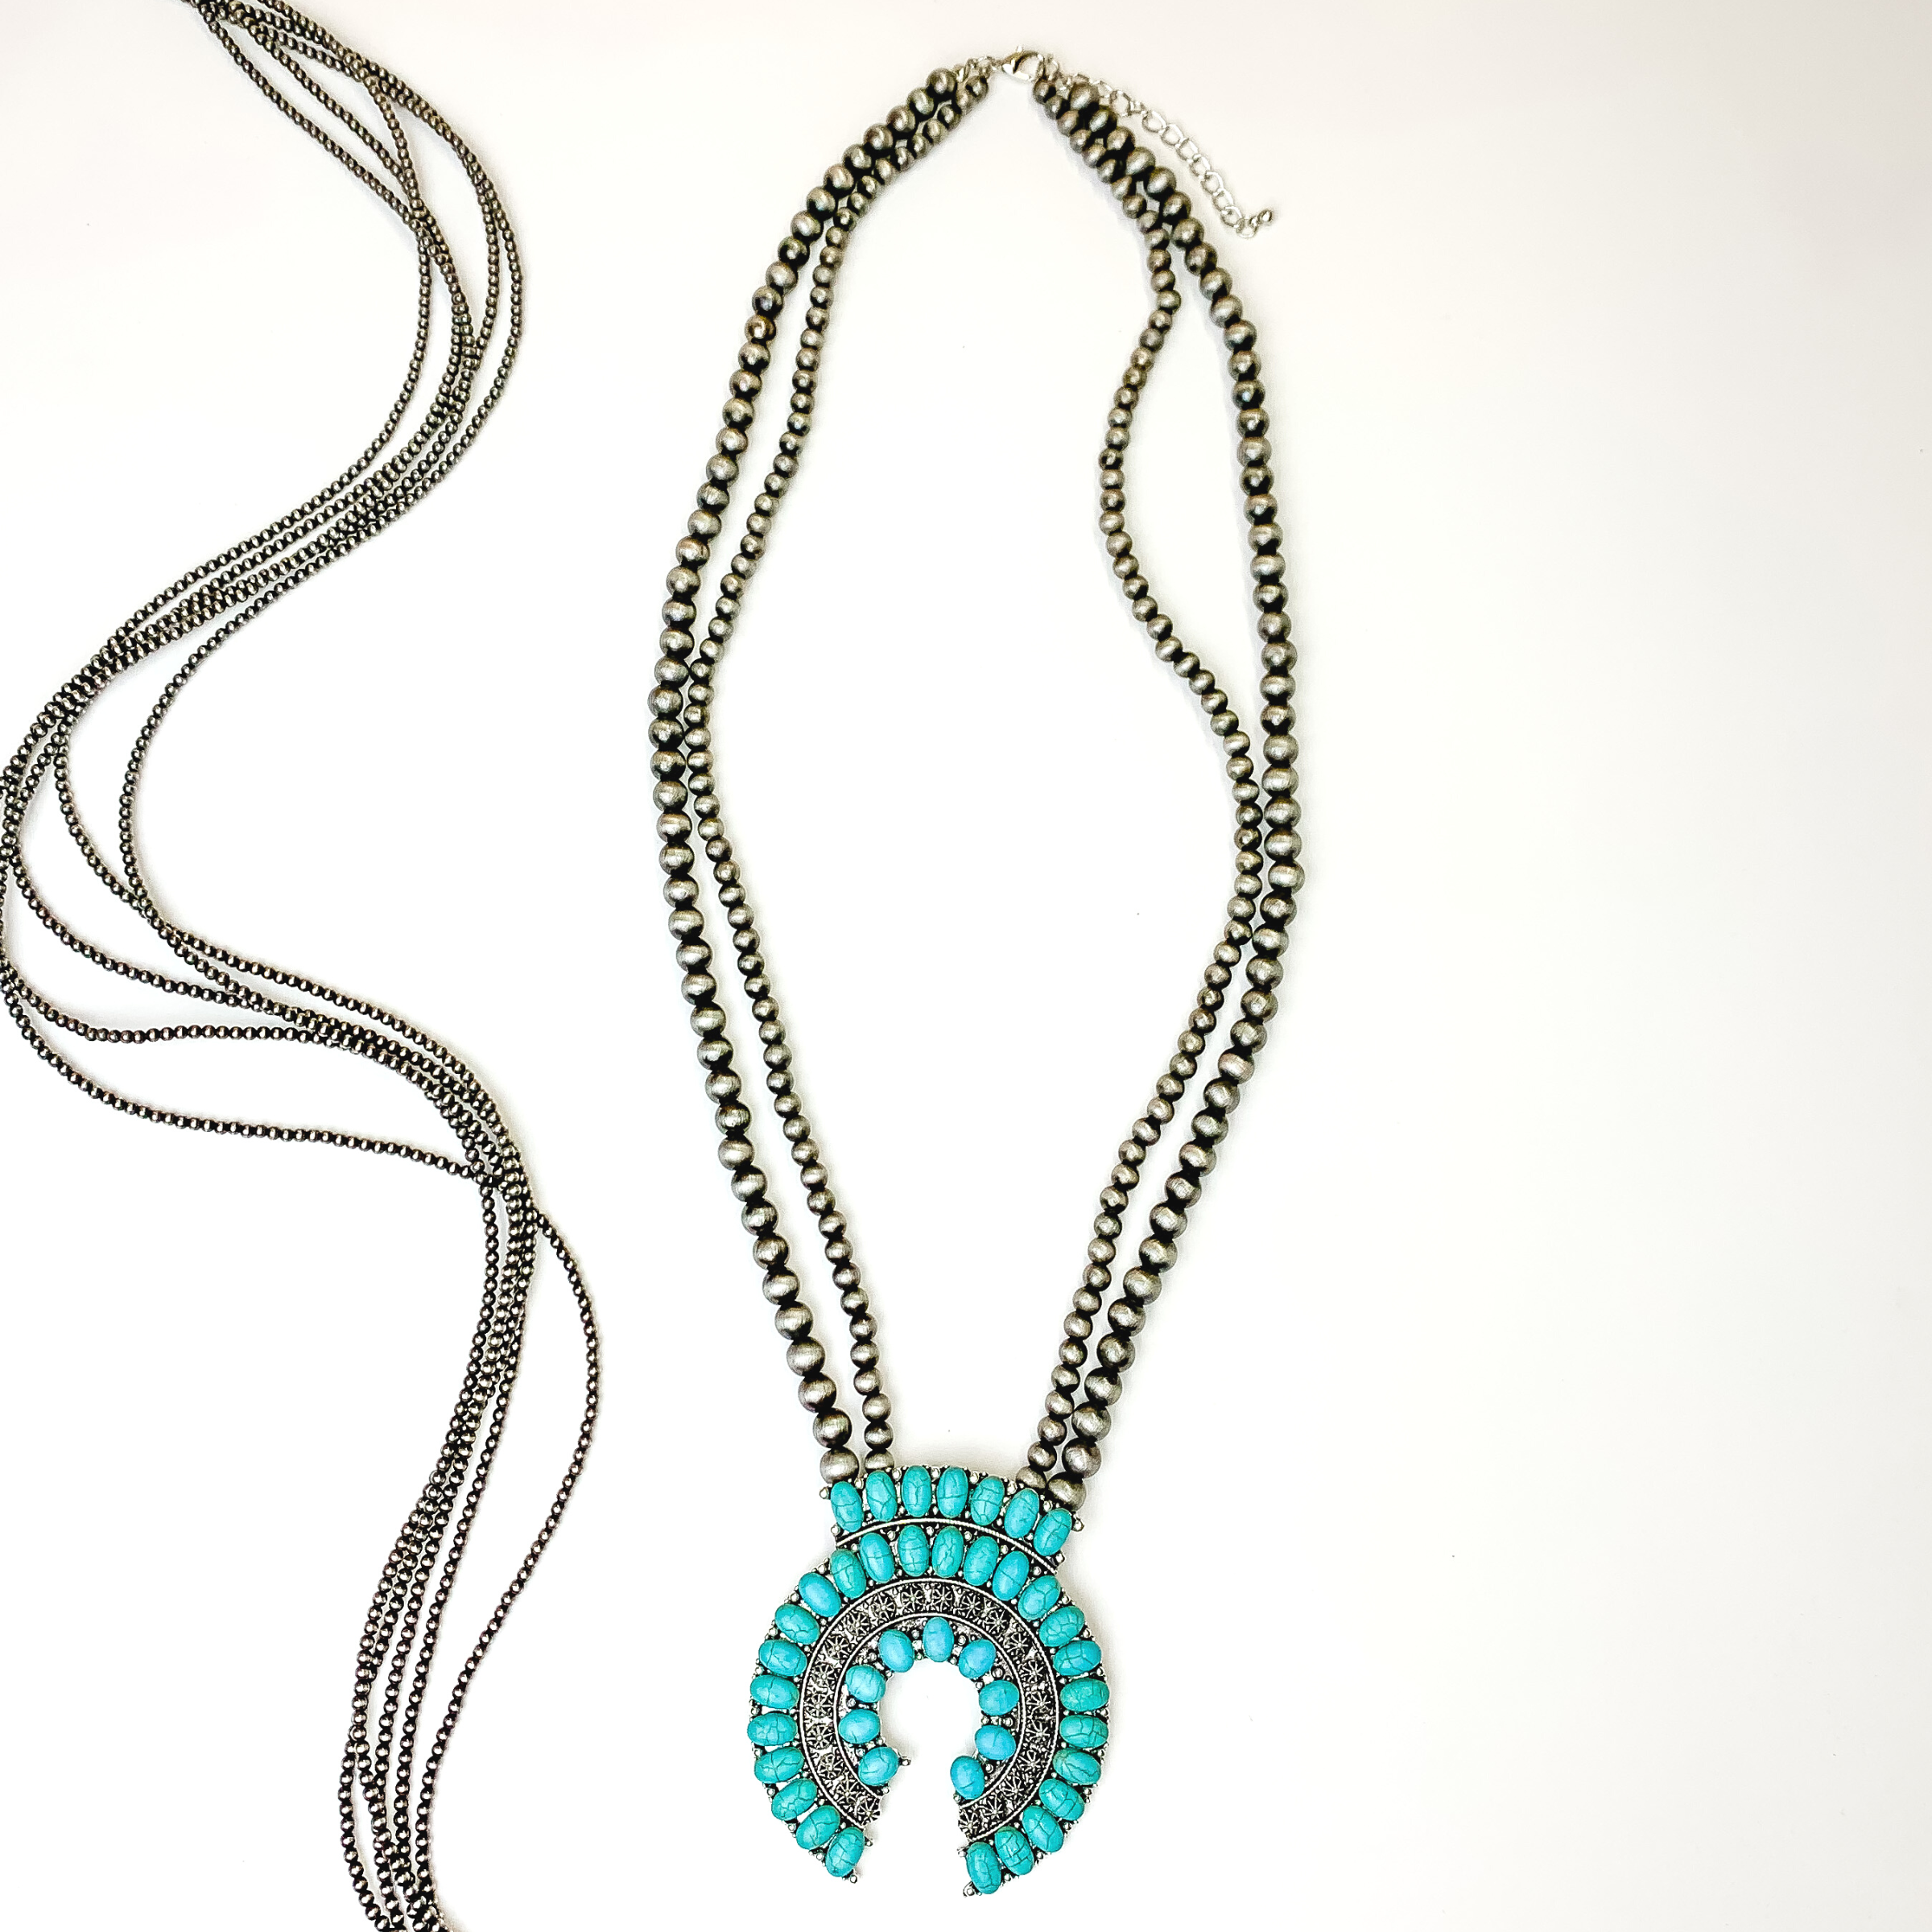 Oval Pendant Necklace with Turquoise Beading